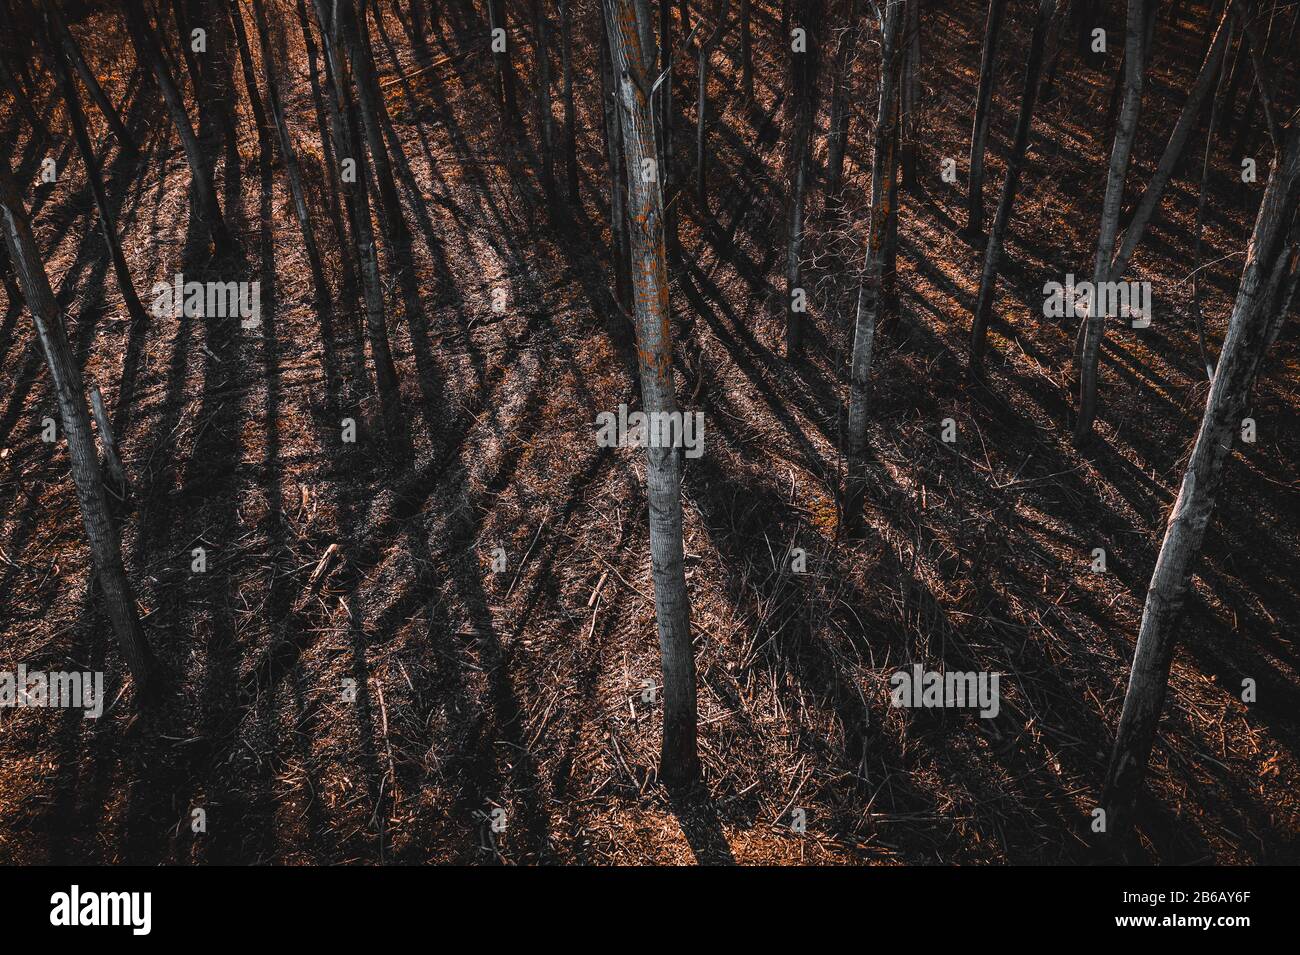 Tire track tread marks in aspen tree forest, high angle view from drone pov Stock Photo